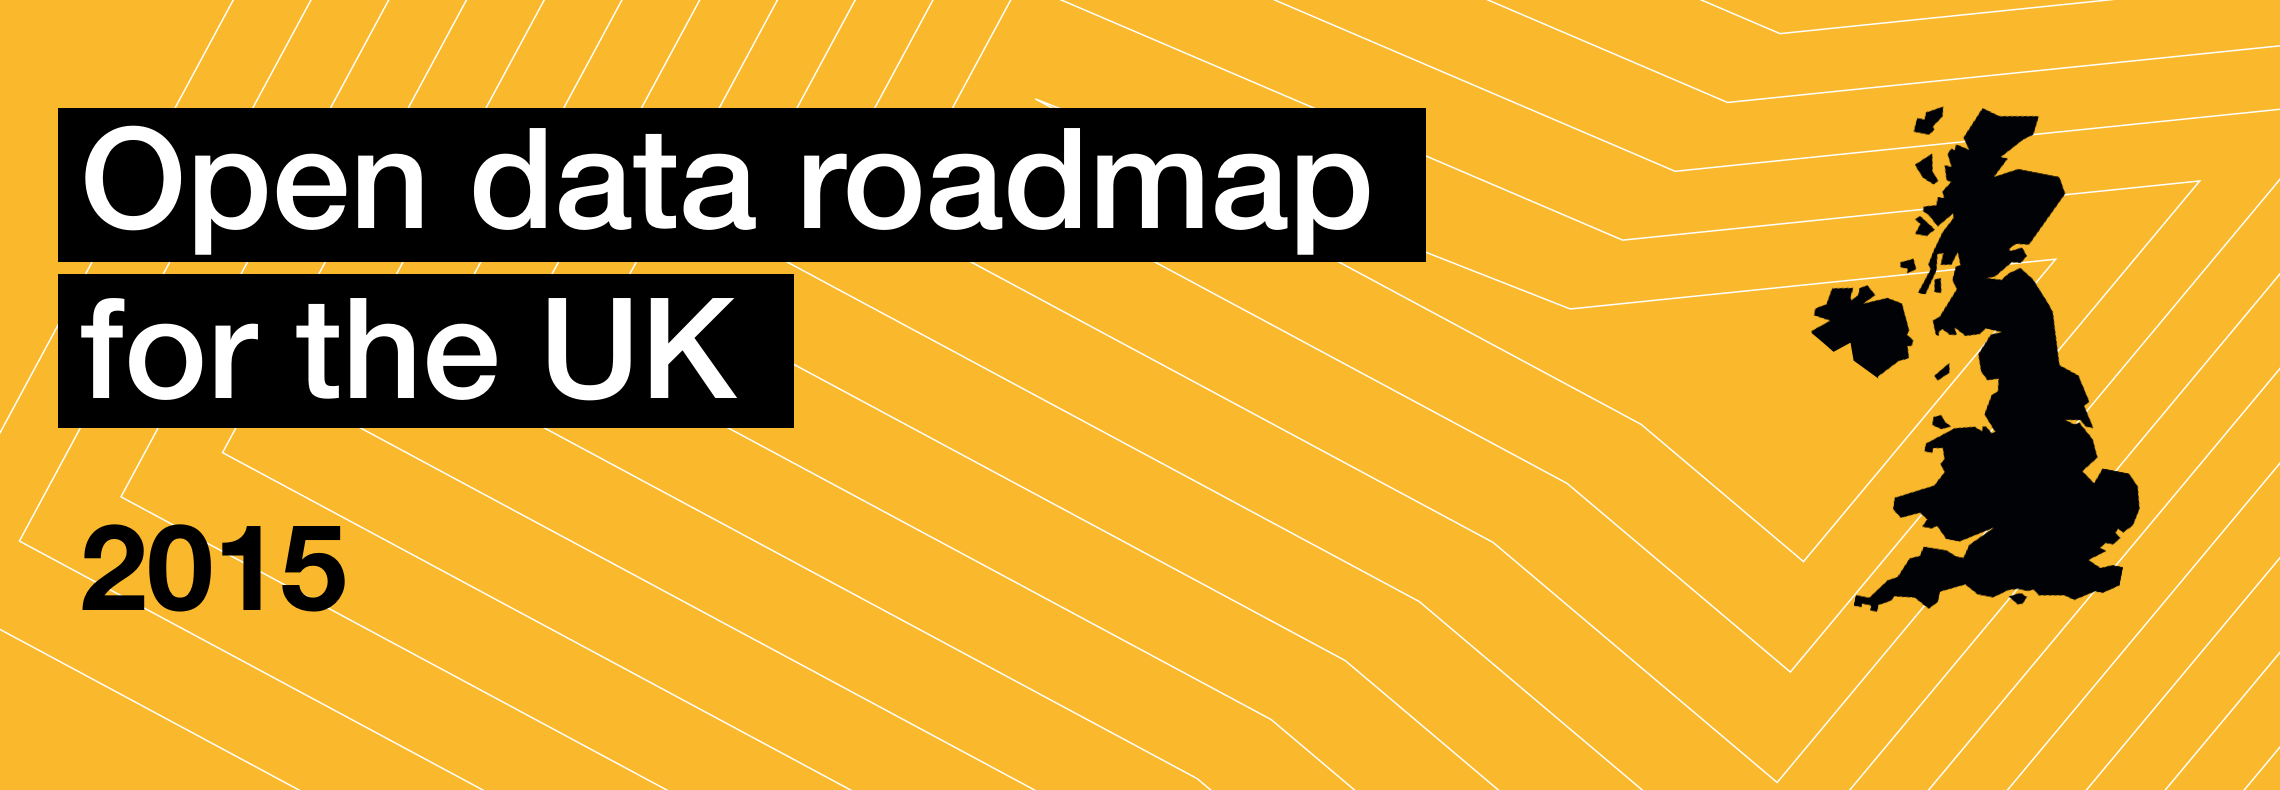 Open data roadmap for the UK is launched | News | Open ...